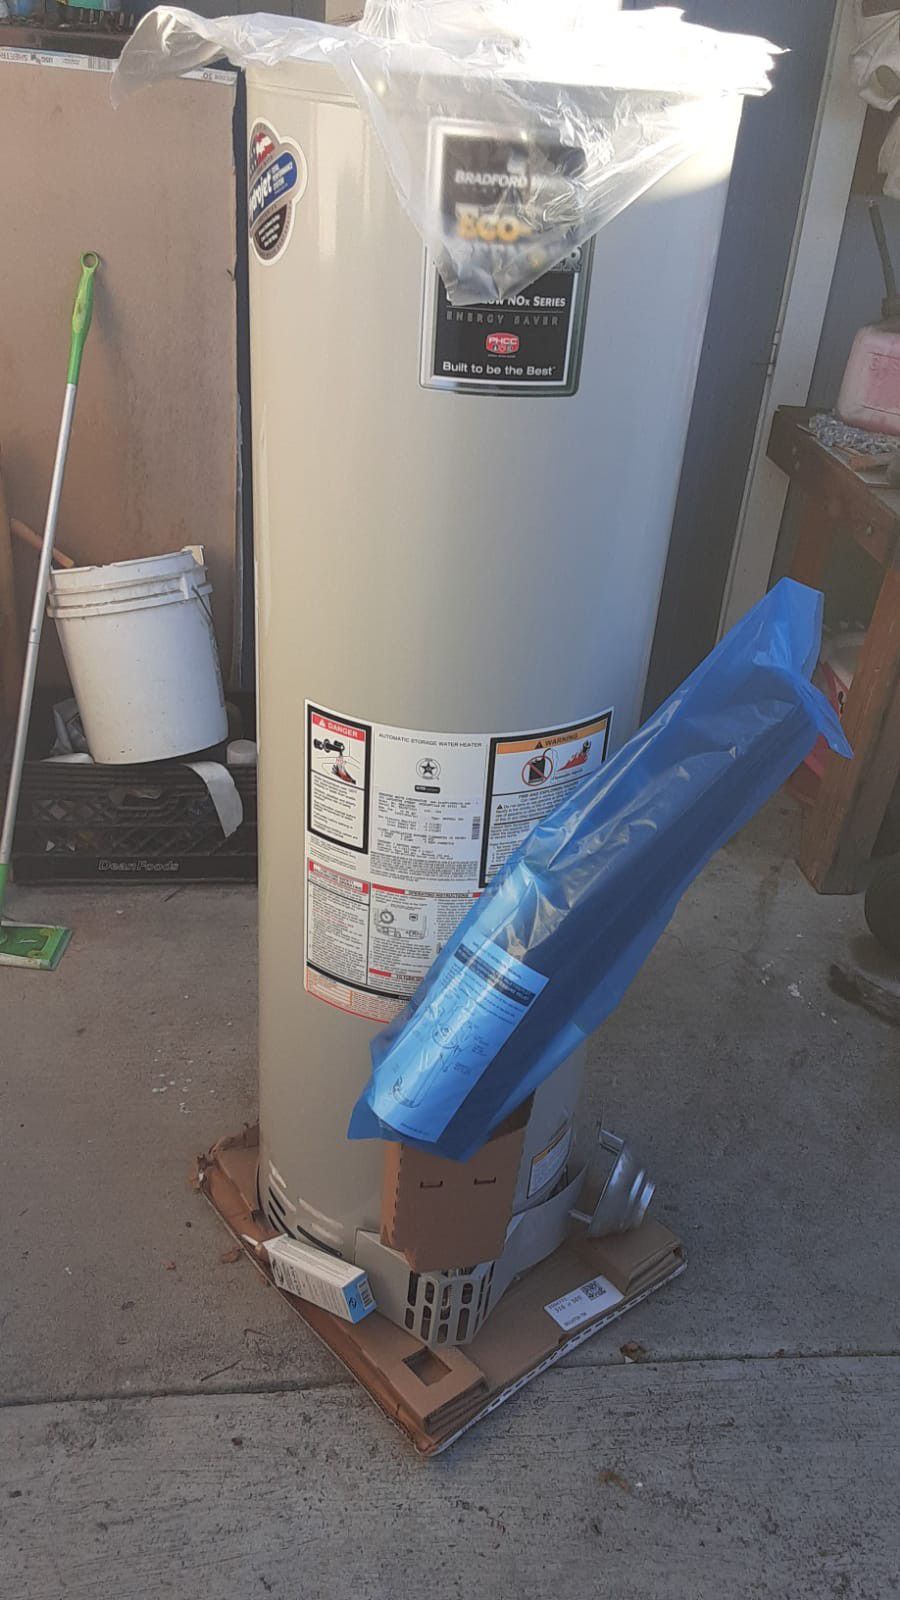 Water Heater 40gal, Brand New in Box (6yr warranty) Will install if needed.